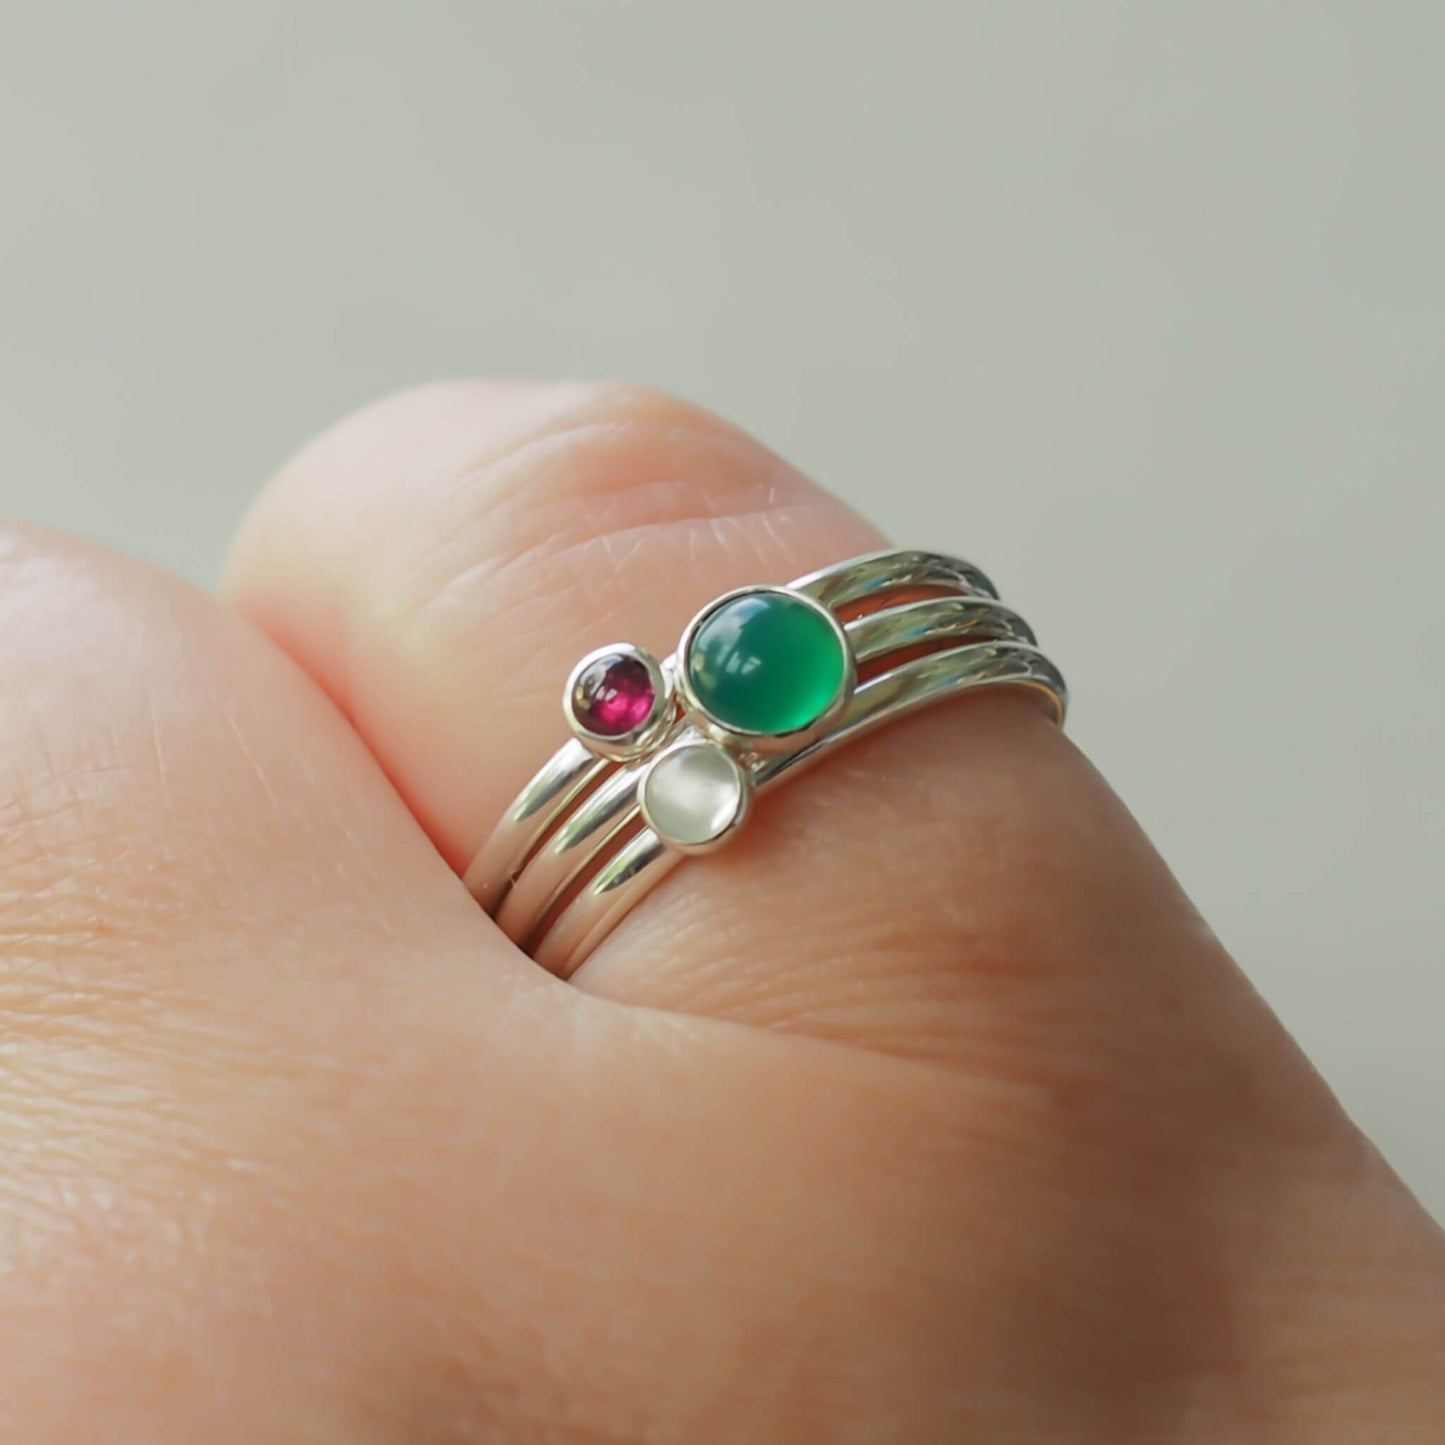 Three Birthstone Ring set made from Sterling Silver, with a 5mm round Green Agate Birthstone for May, and two smaller 3mm gemstones in Garnet for January, and Moonstone for June. The gemstones colours are emerald green, deep red and milky white. Handmade in Scotland by Maram Jewellery